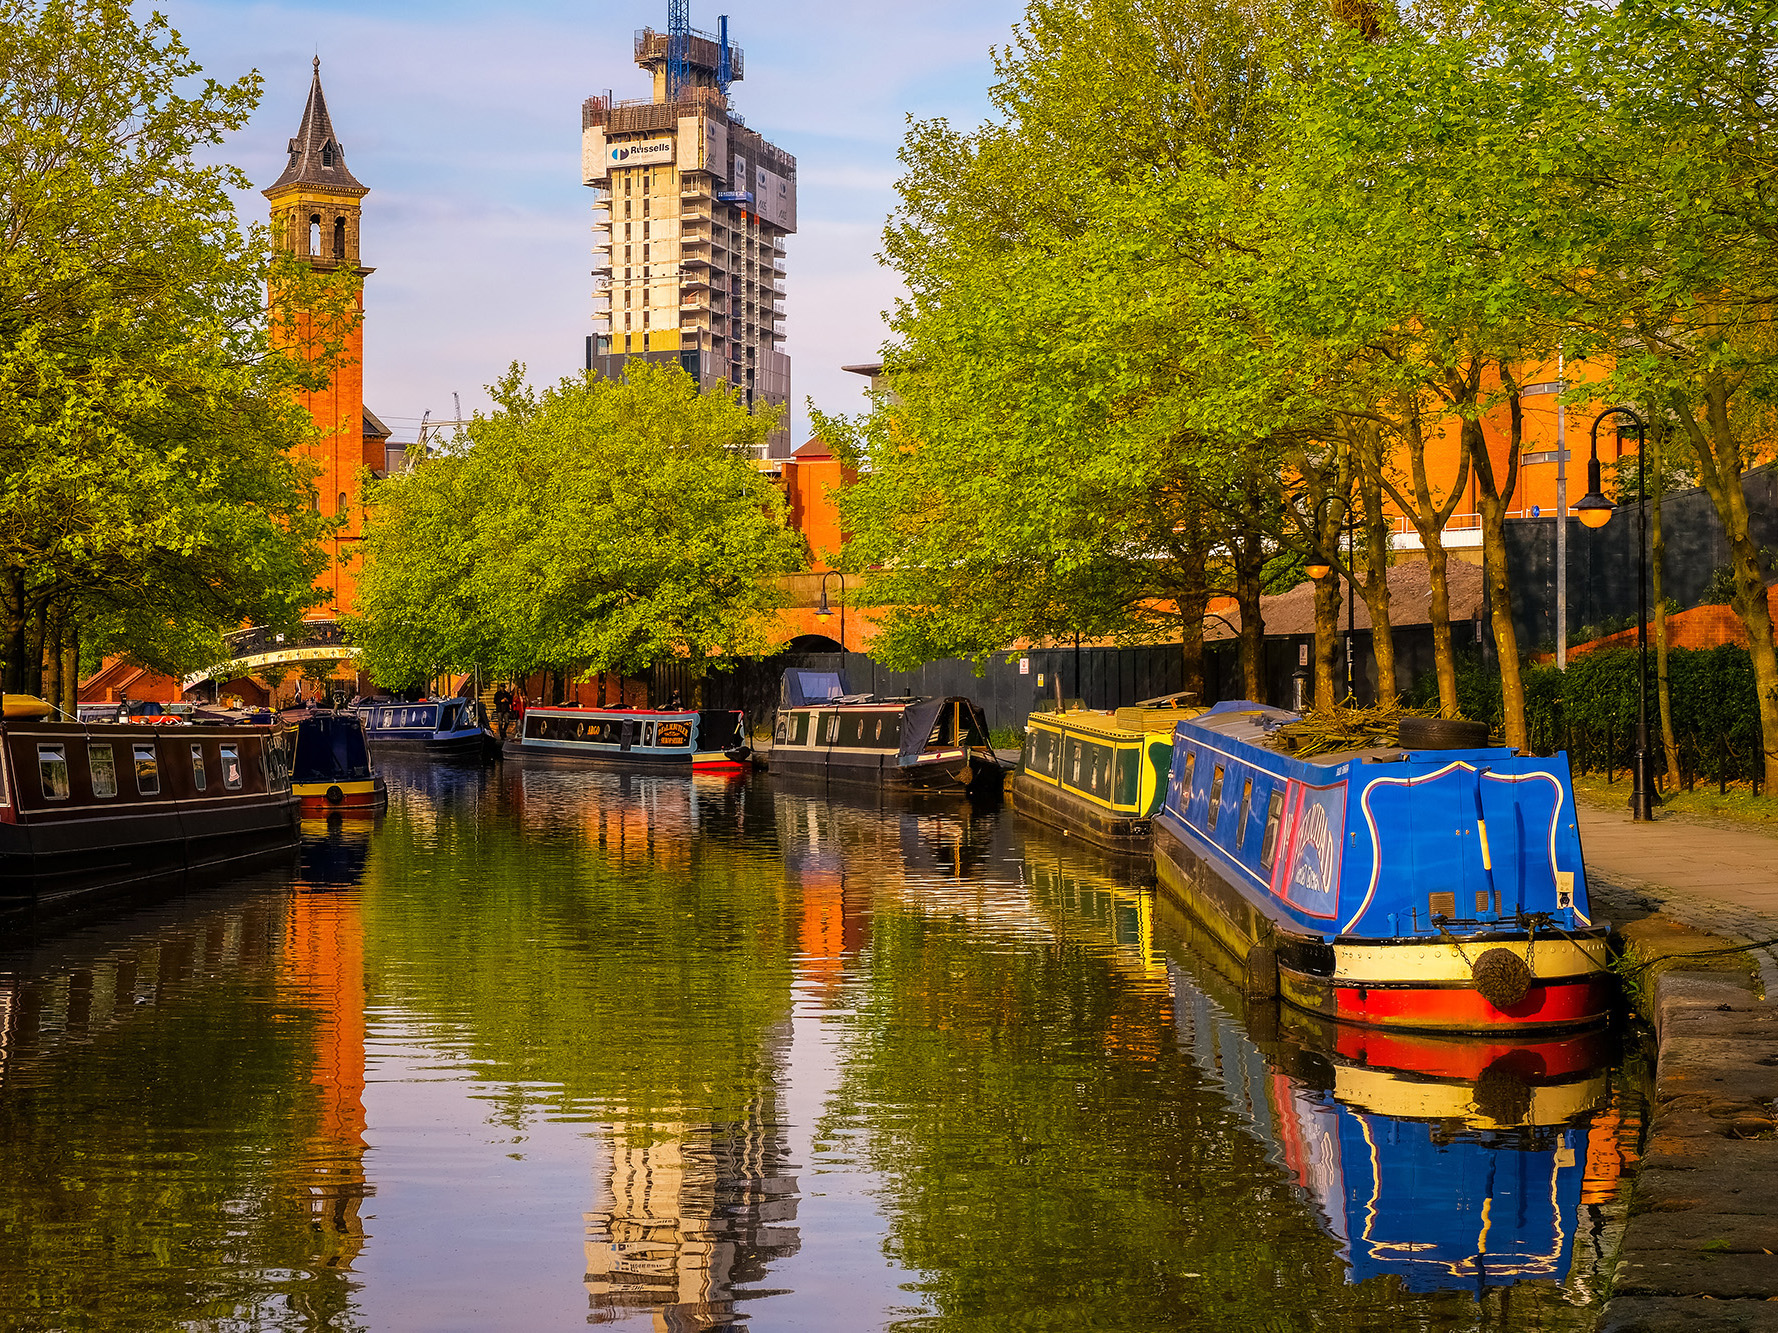 Top 5 destinations in UK - Manchester